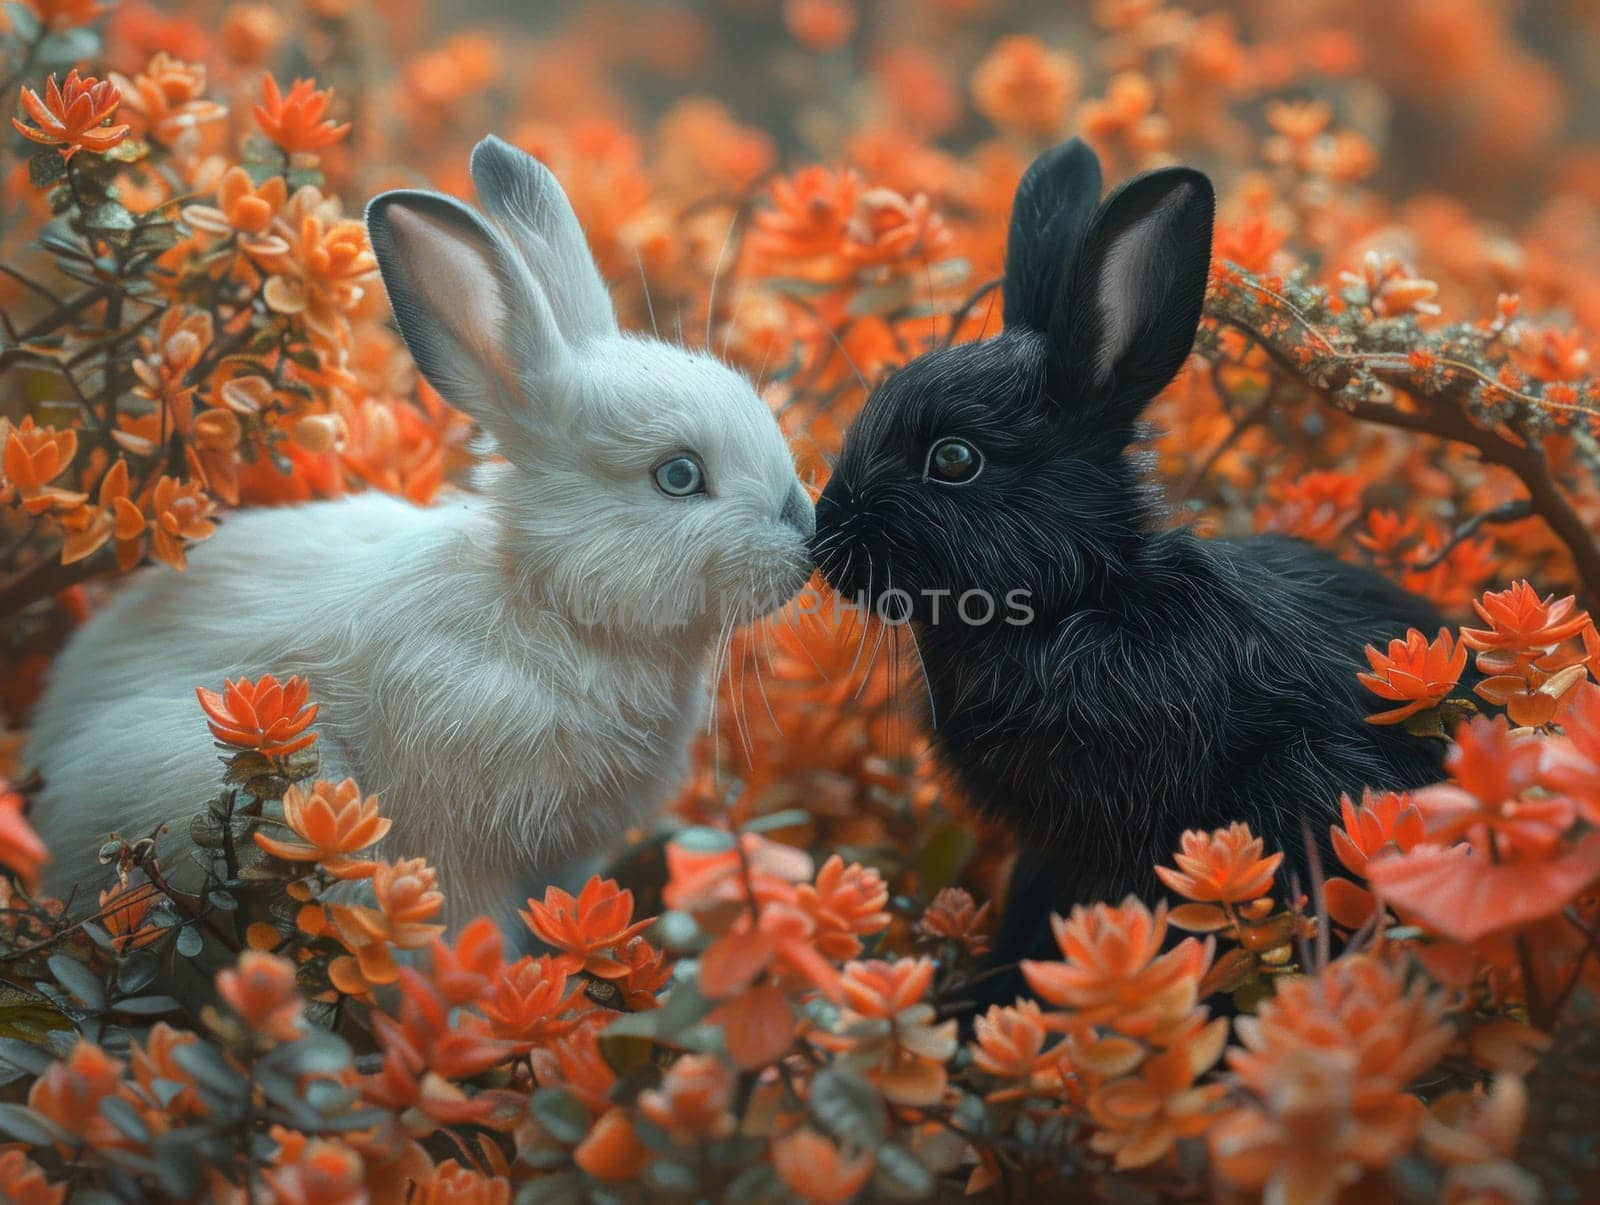 Two rabbits, one black and one white, are grazing in a field of vibrant orange flowers.